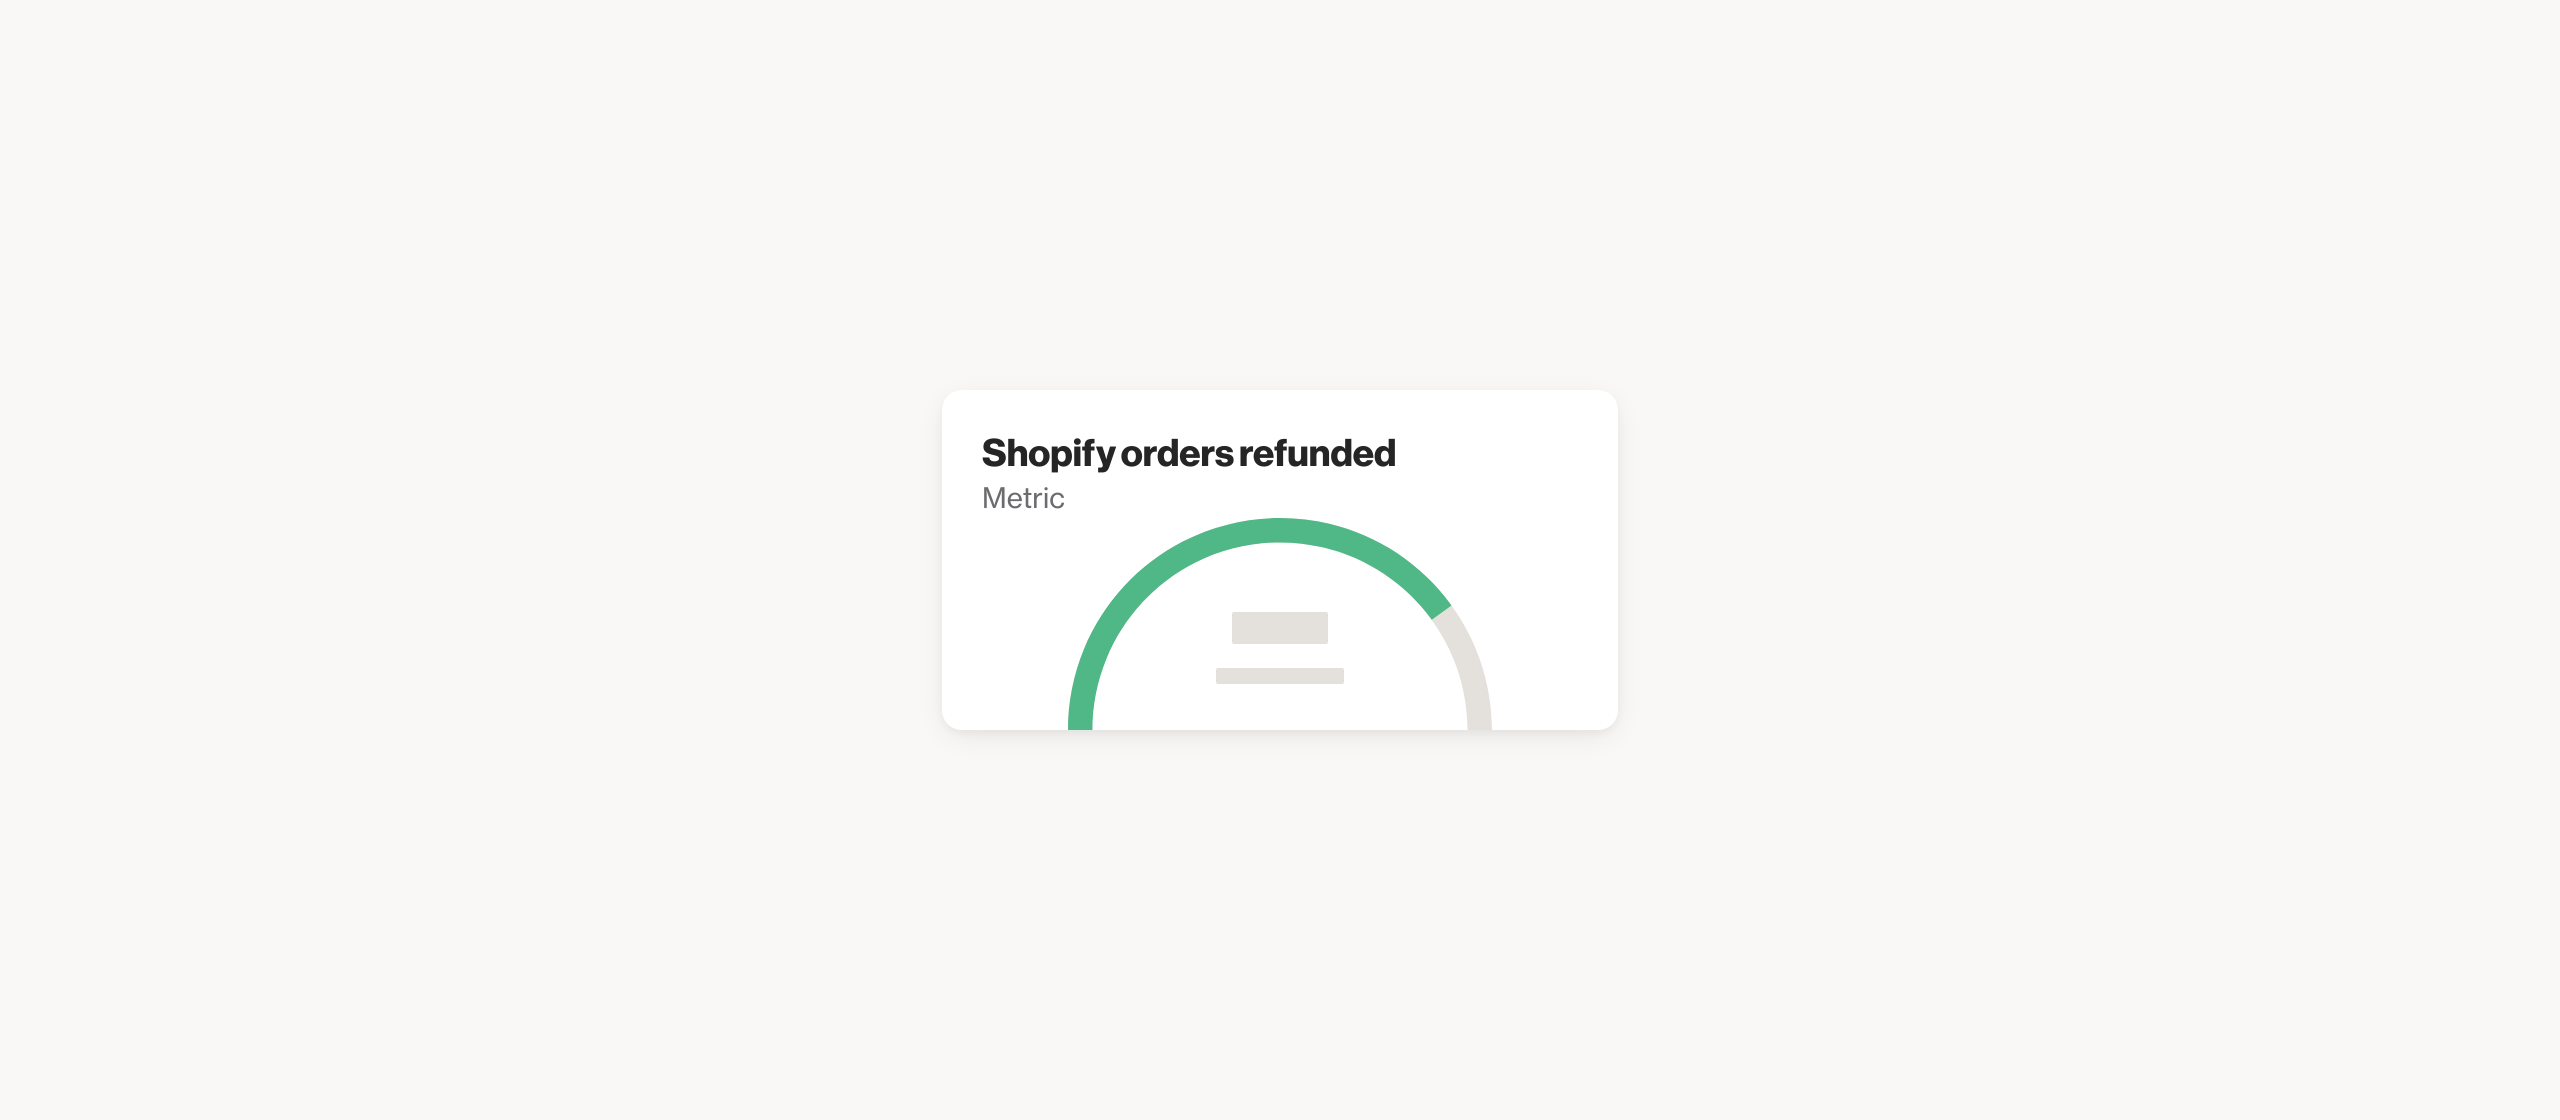 Shopify orders refunded